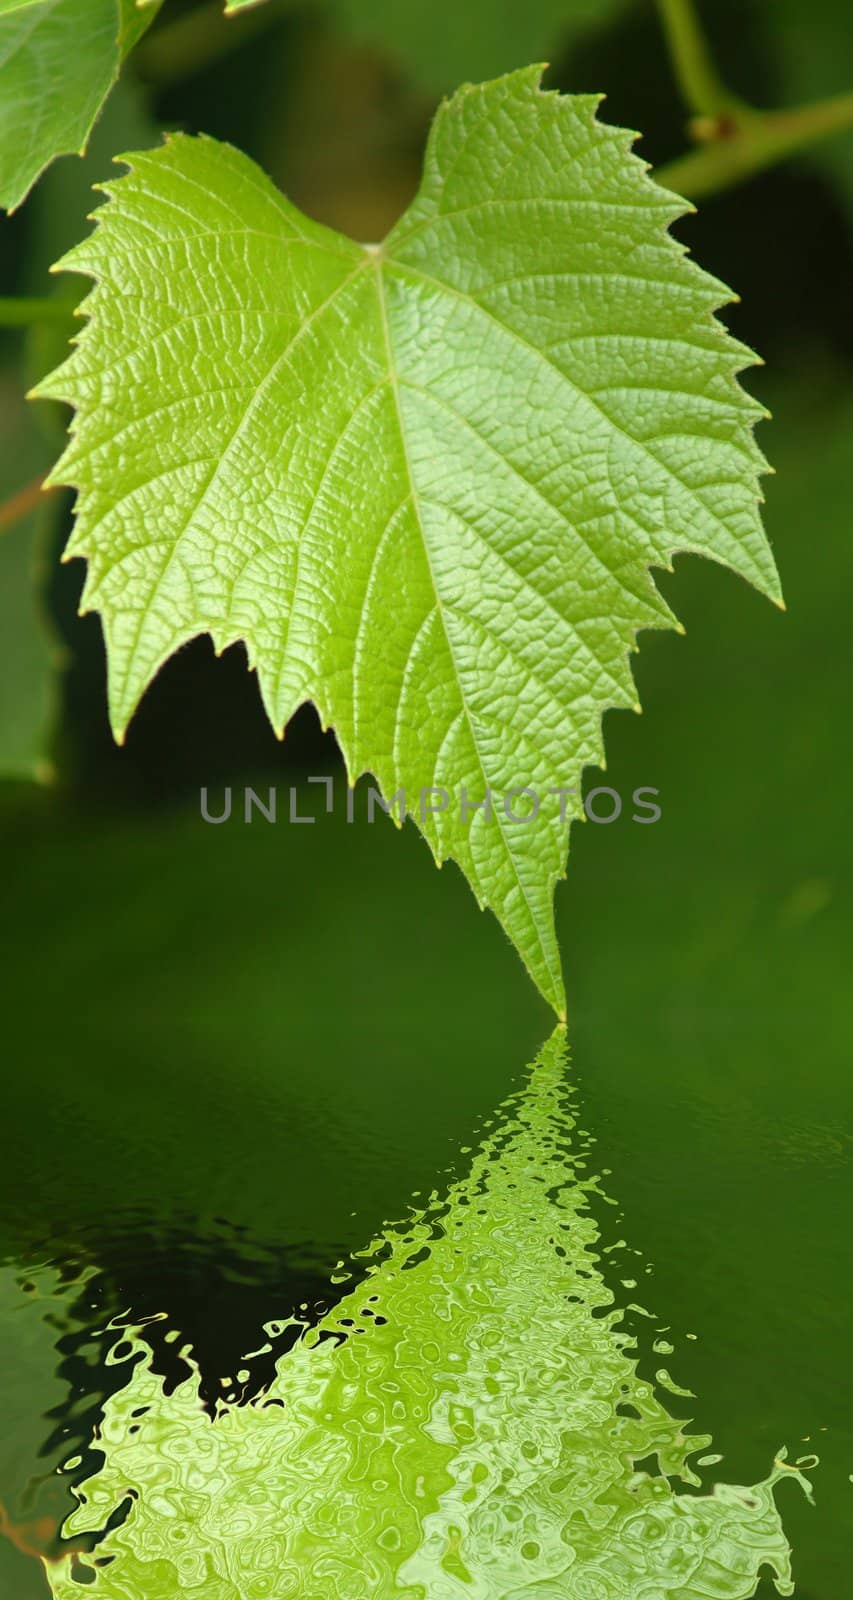 The image of a green grape leaf